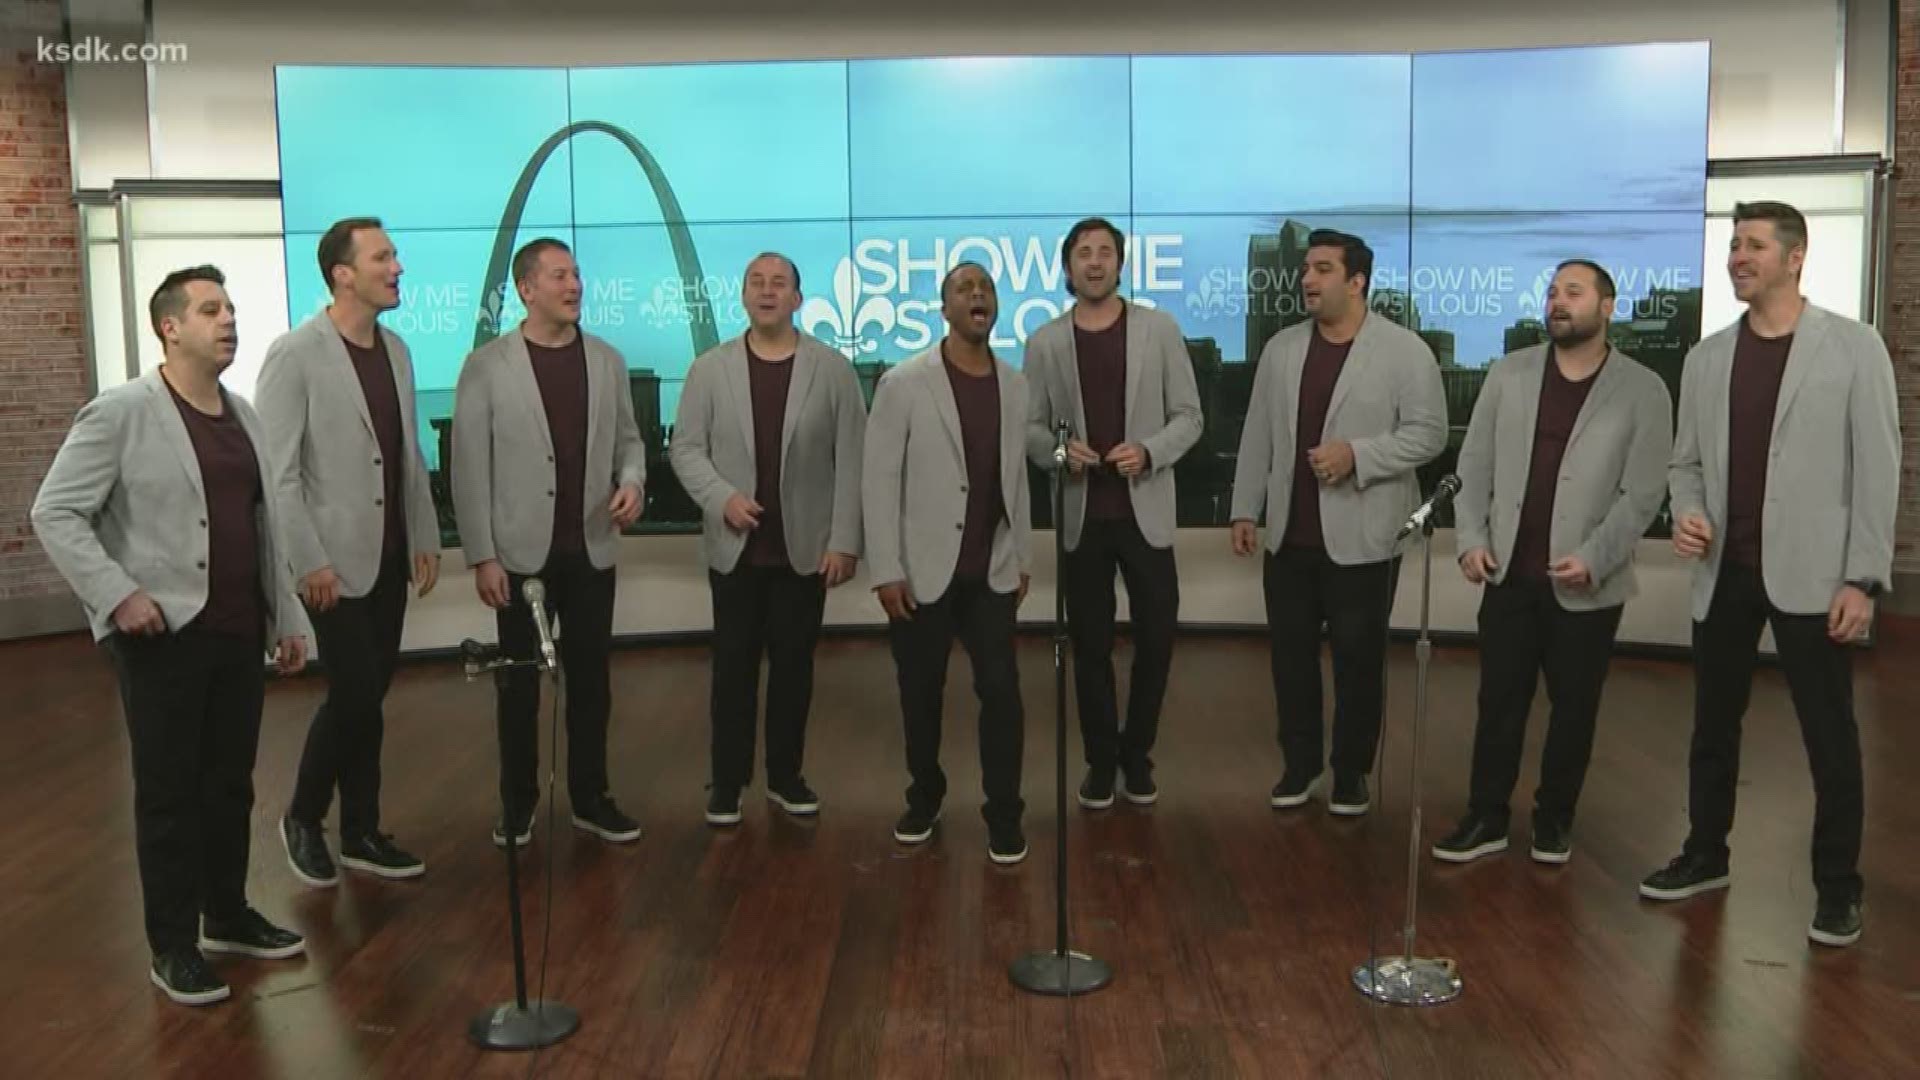 A cappella YouTube sensation Straight No Chaser stopped by the studio prior to their performance at The Fabulous Fox Theatre.